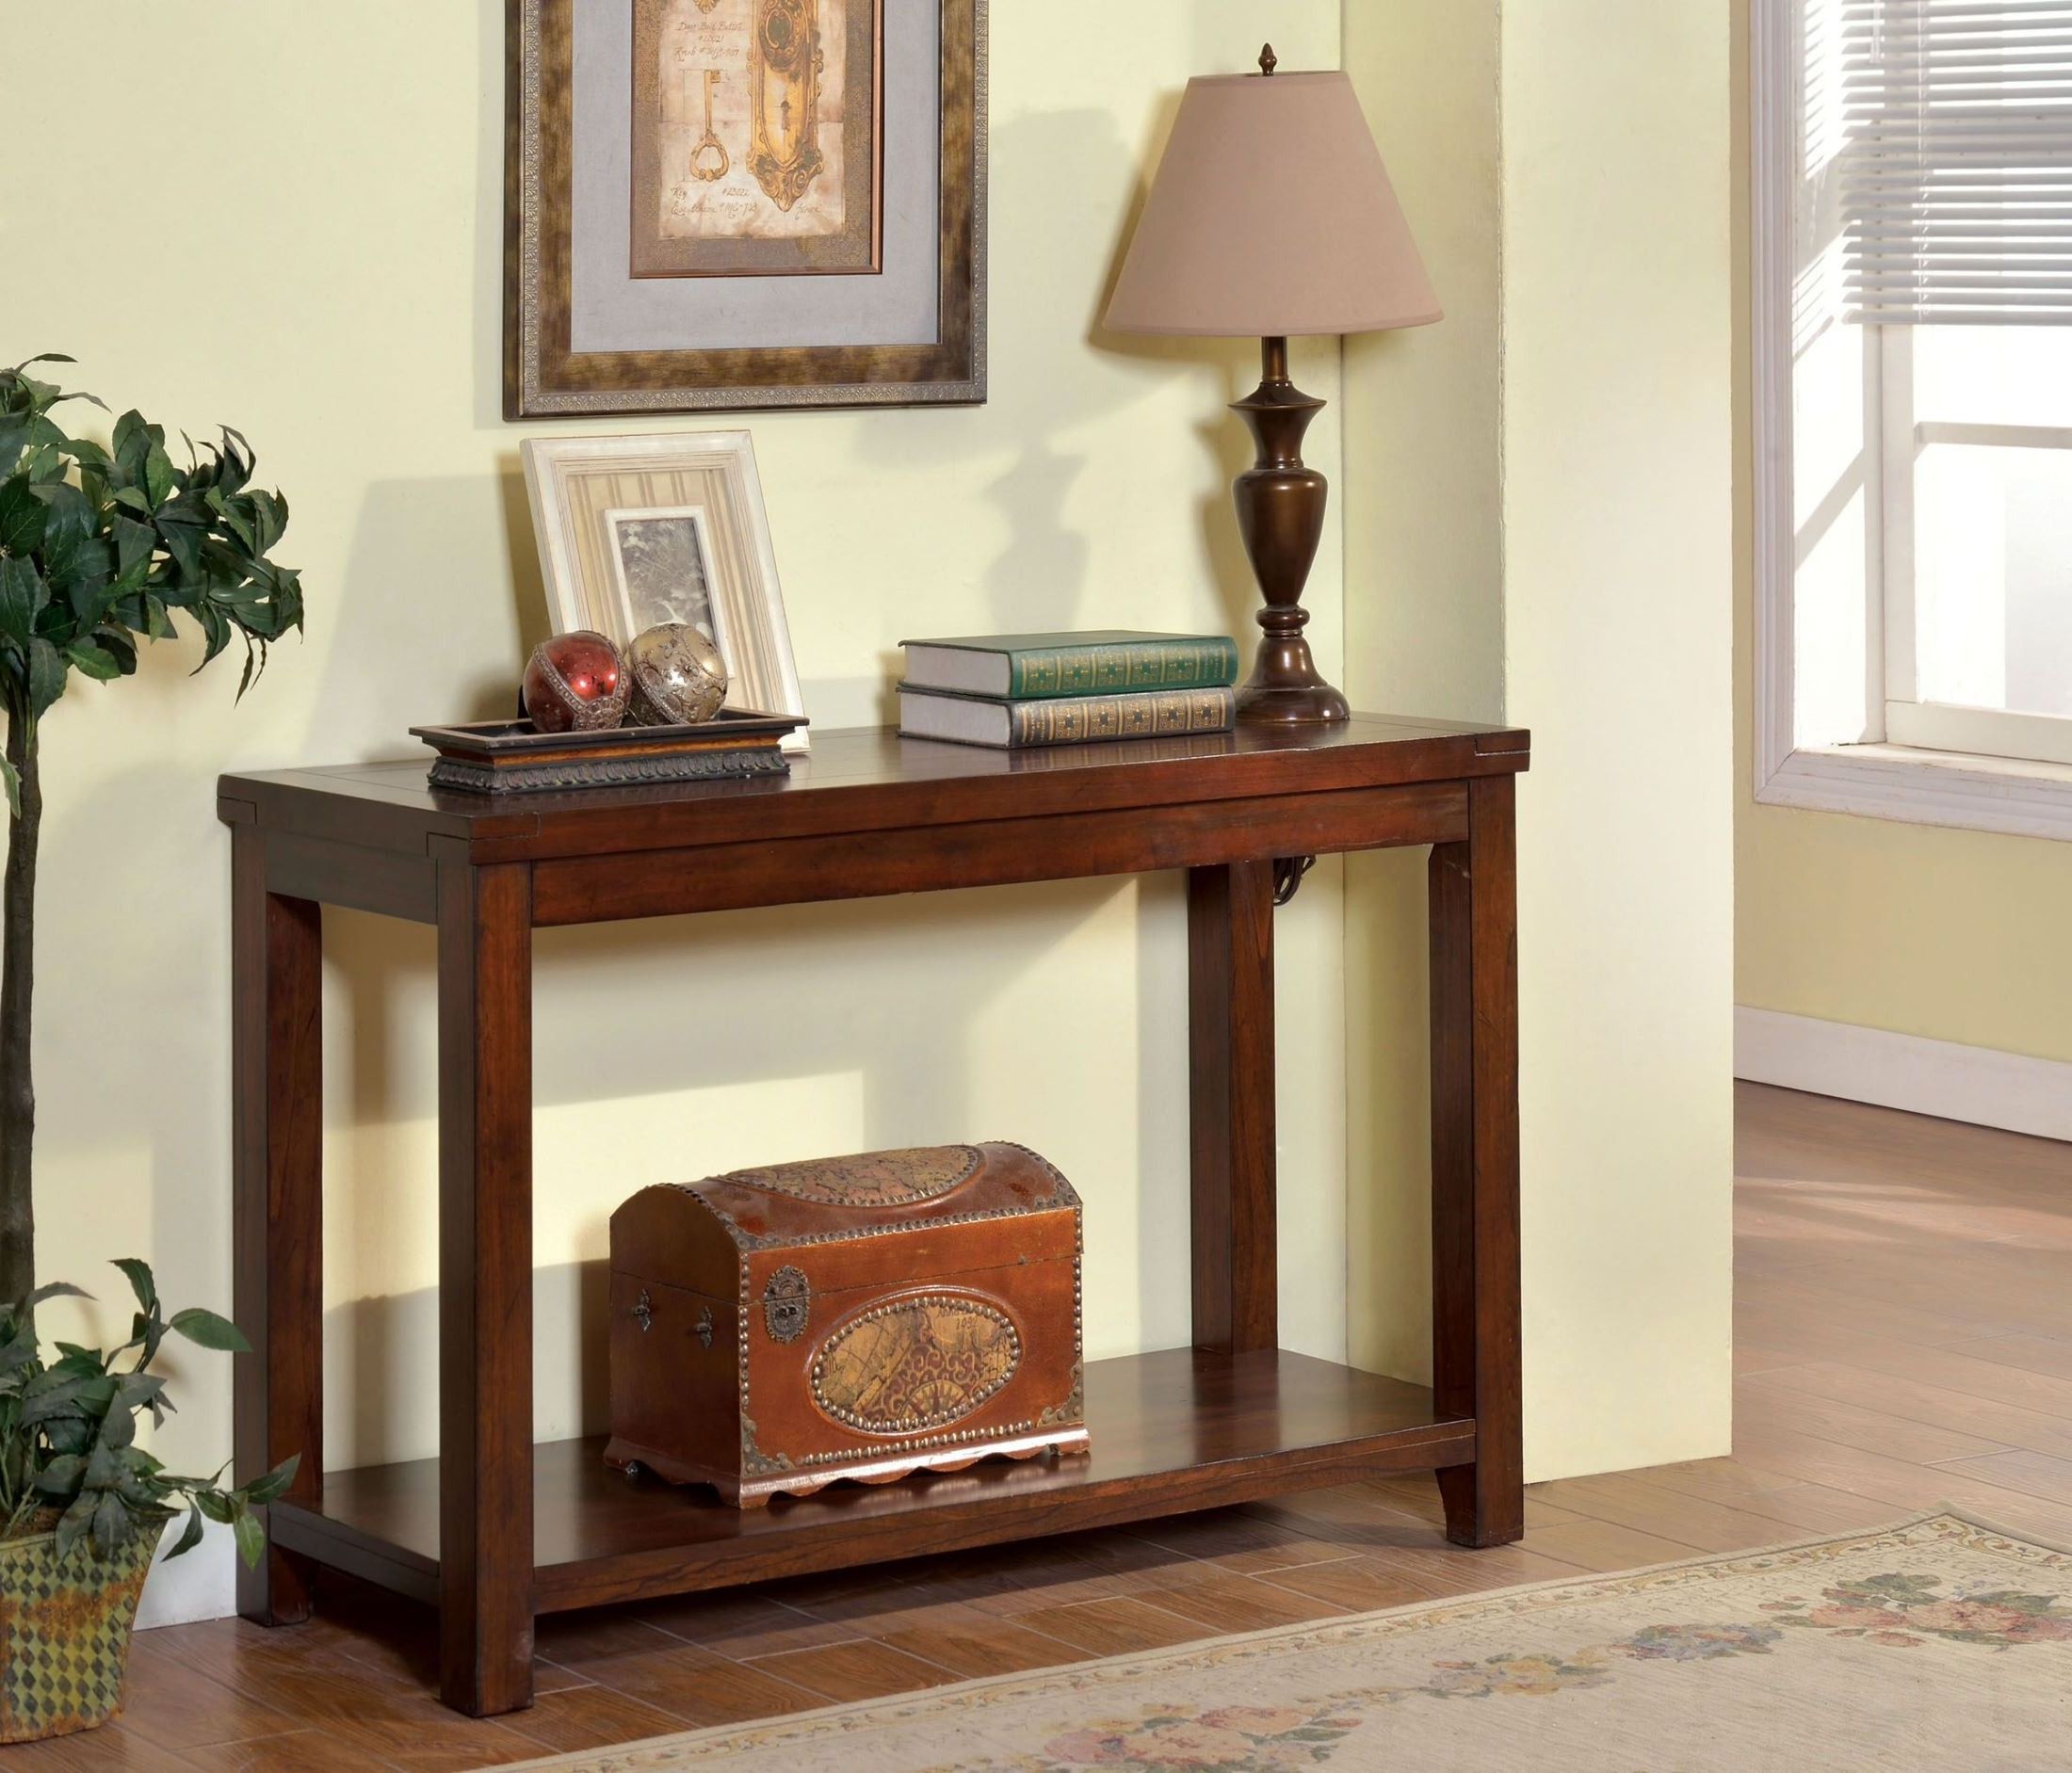 Most Up To Date Estell Cherry Sofa Table From Furniture Of America With Regard To Heartwood Cherry Wood Console Tables (View 6 of 10)